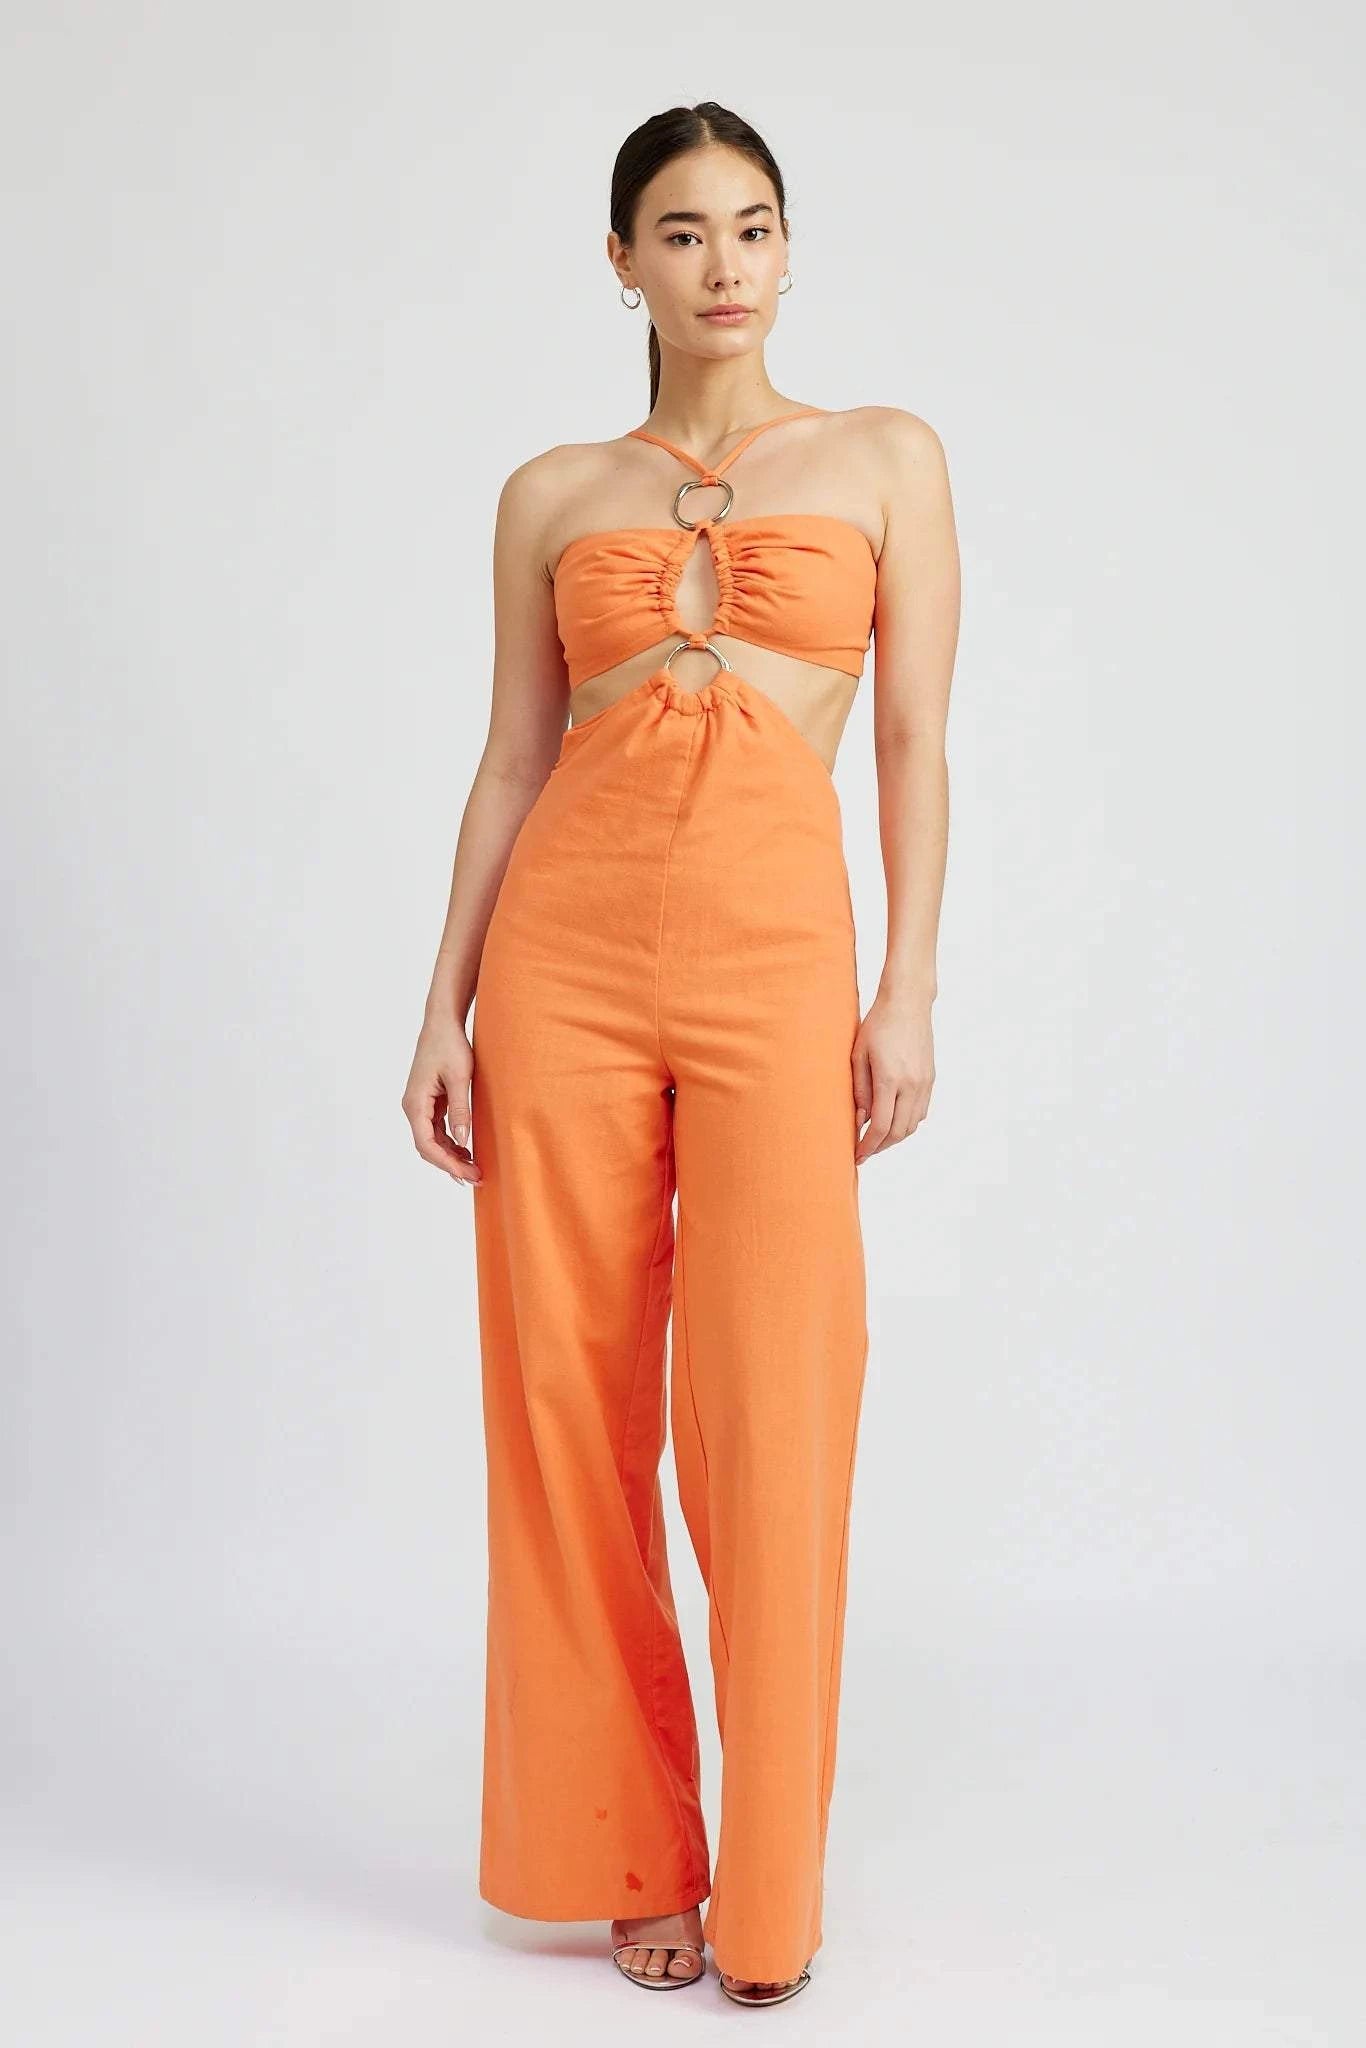 Double O Ring Cut Out JumpsuitRing CutSouthern Peach 